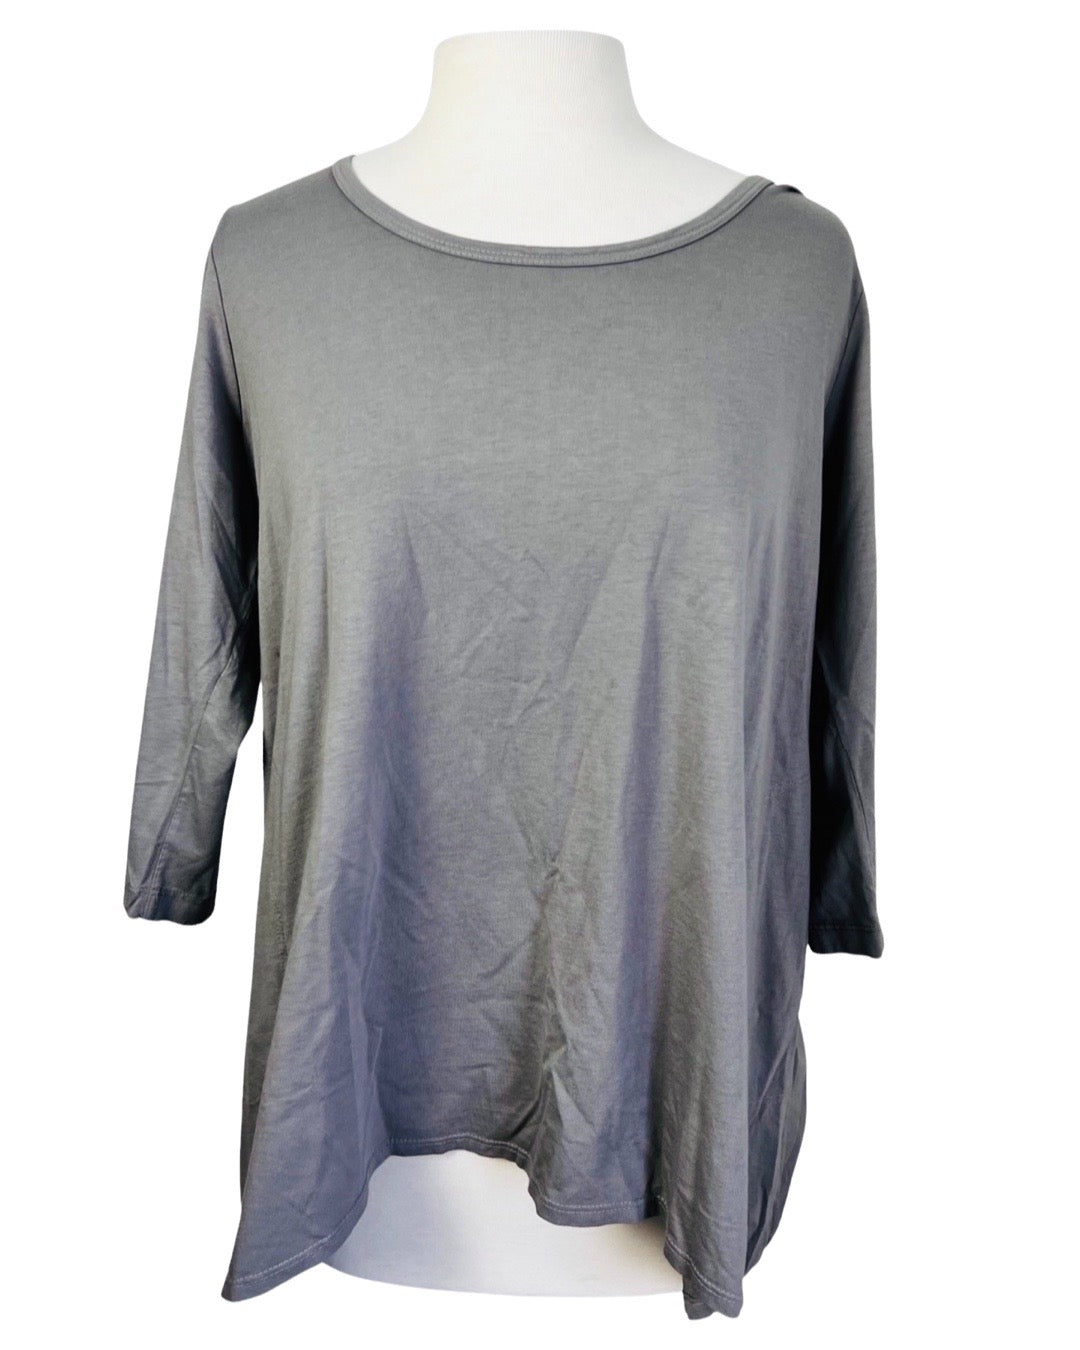 iCantoo Lt Grey Asymmetrical Top with Pockets